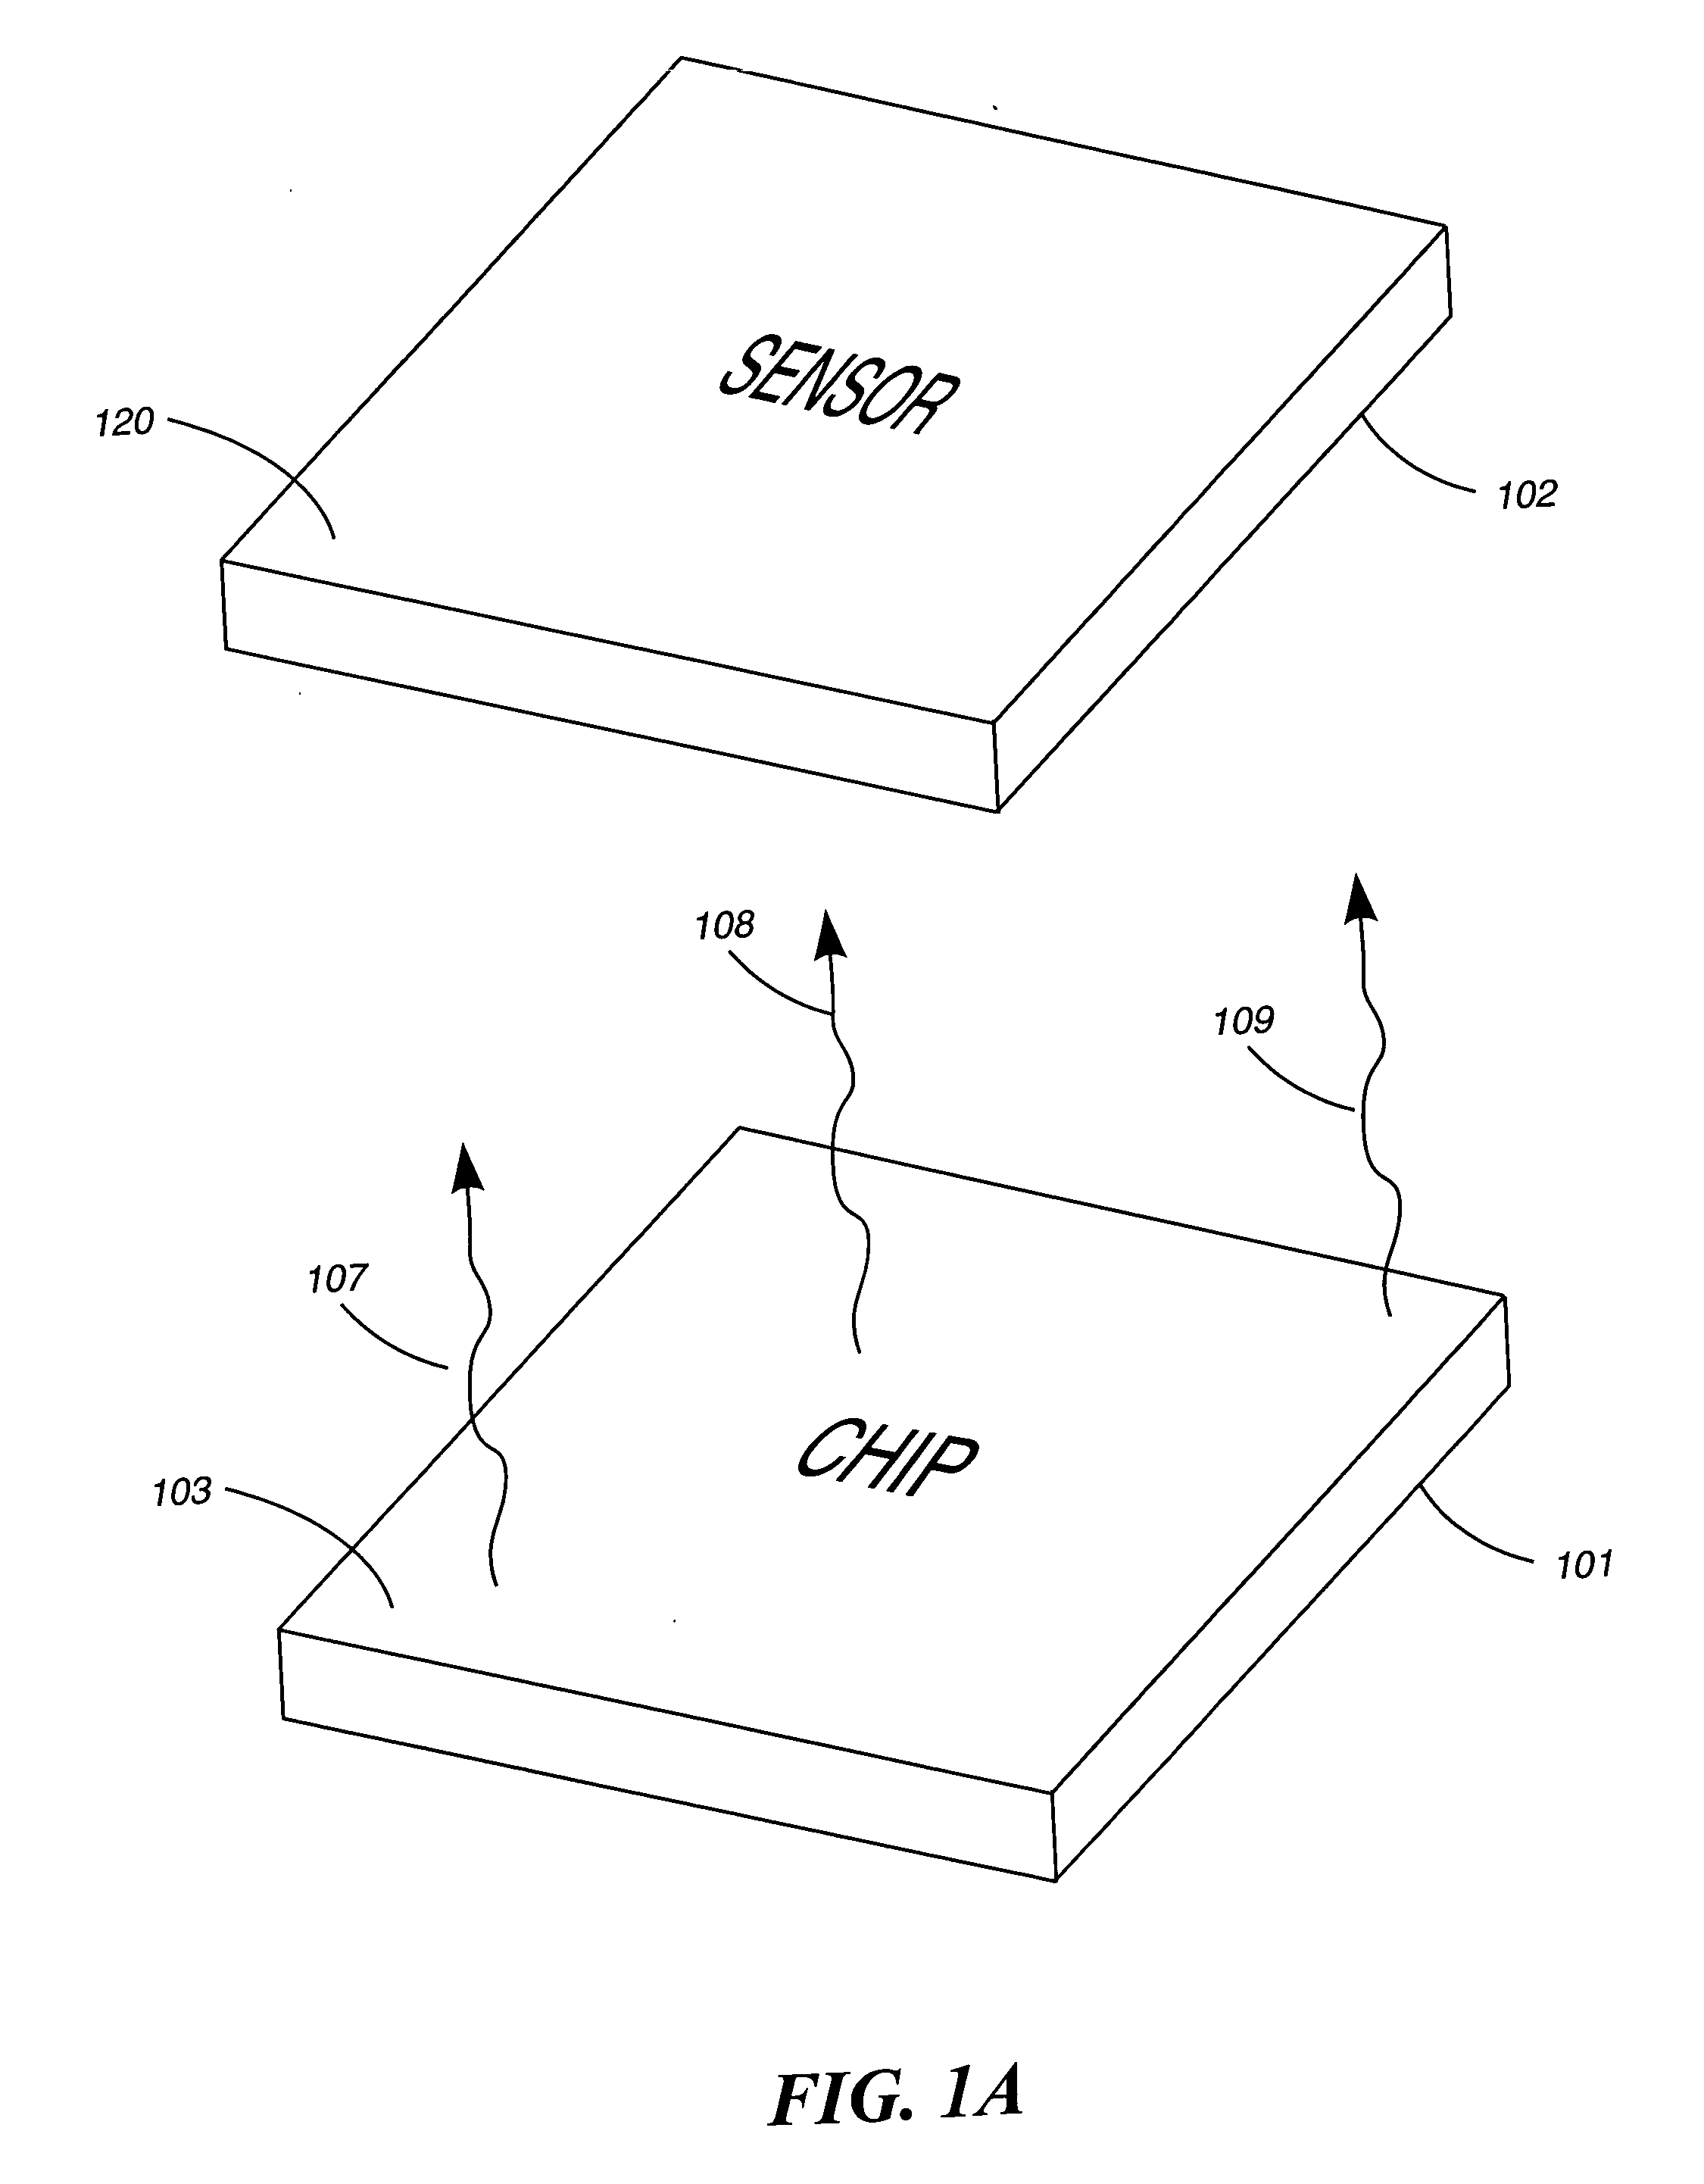 Thermal measurments of electronic devices during operation